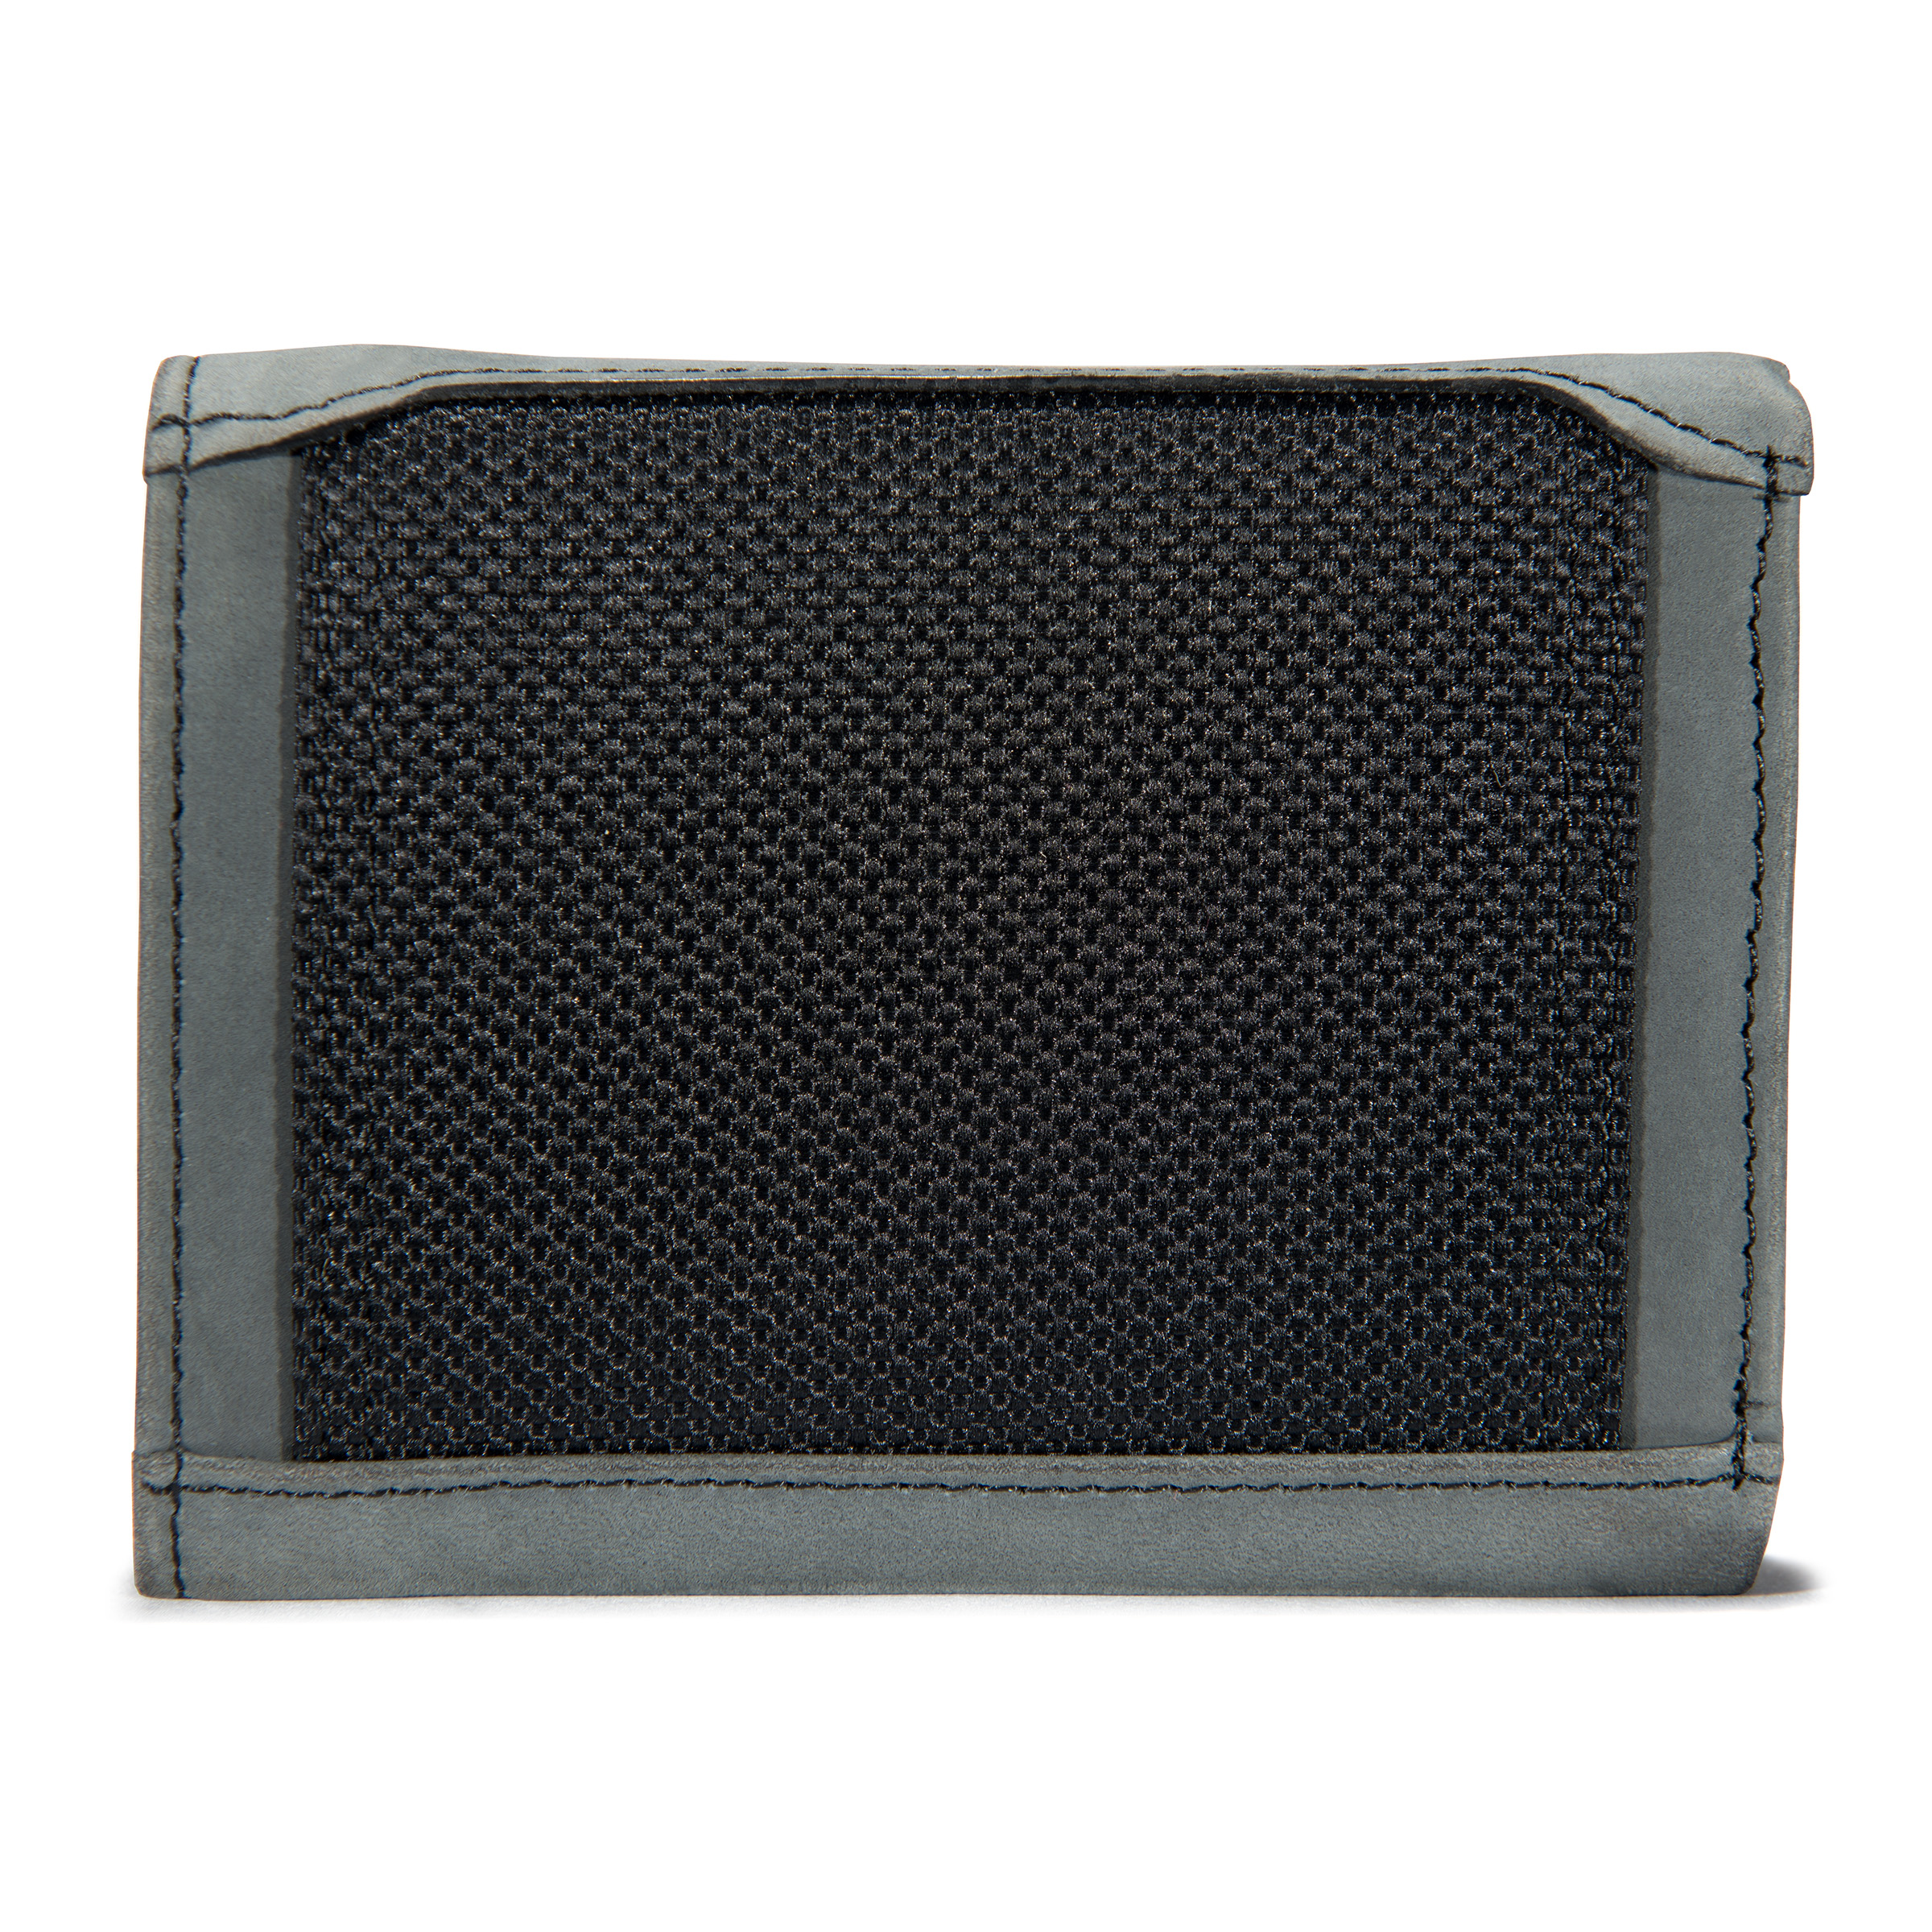 Picture of Carhartt B0000213 Mens Leather Triple-Stitched Trifold Wallet